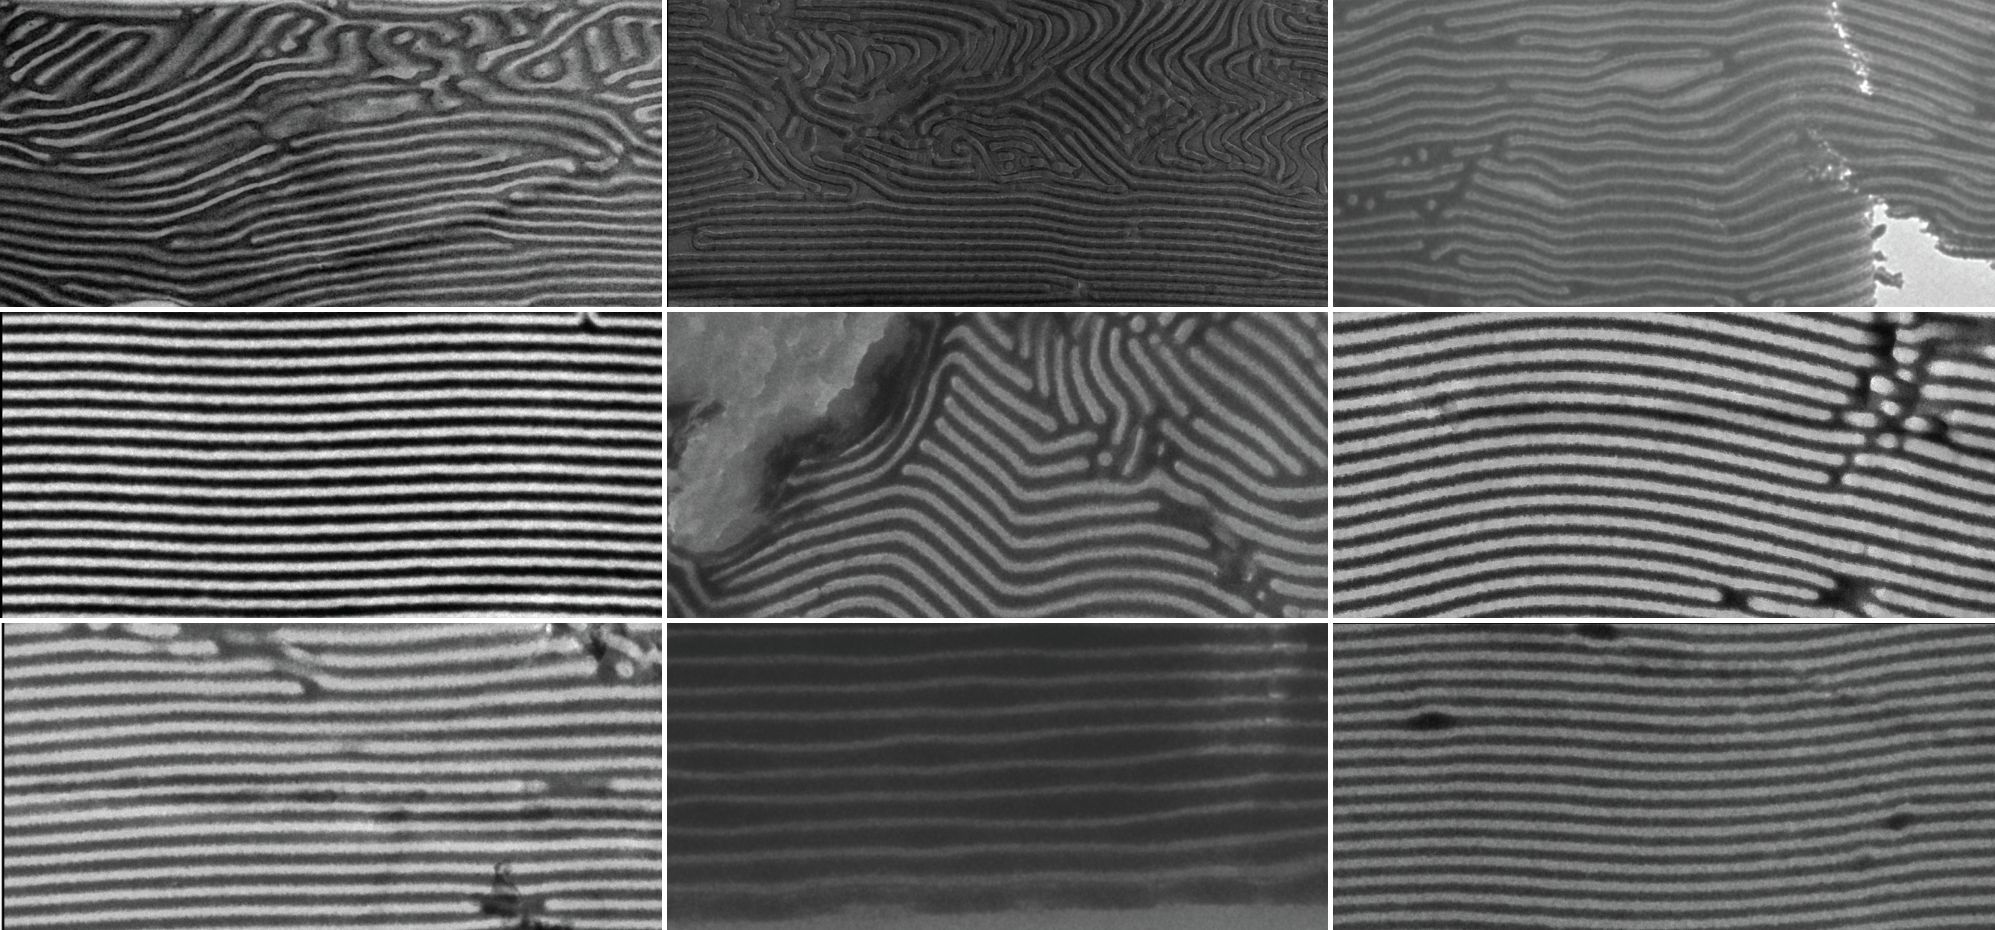 A typology of nano images.